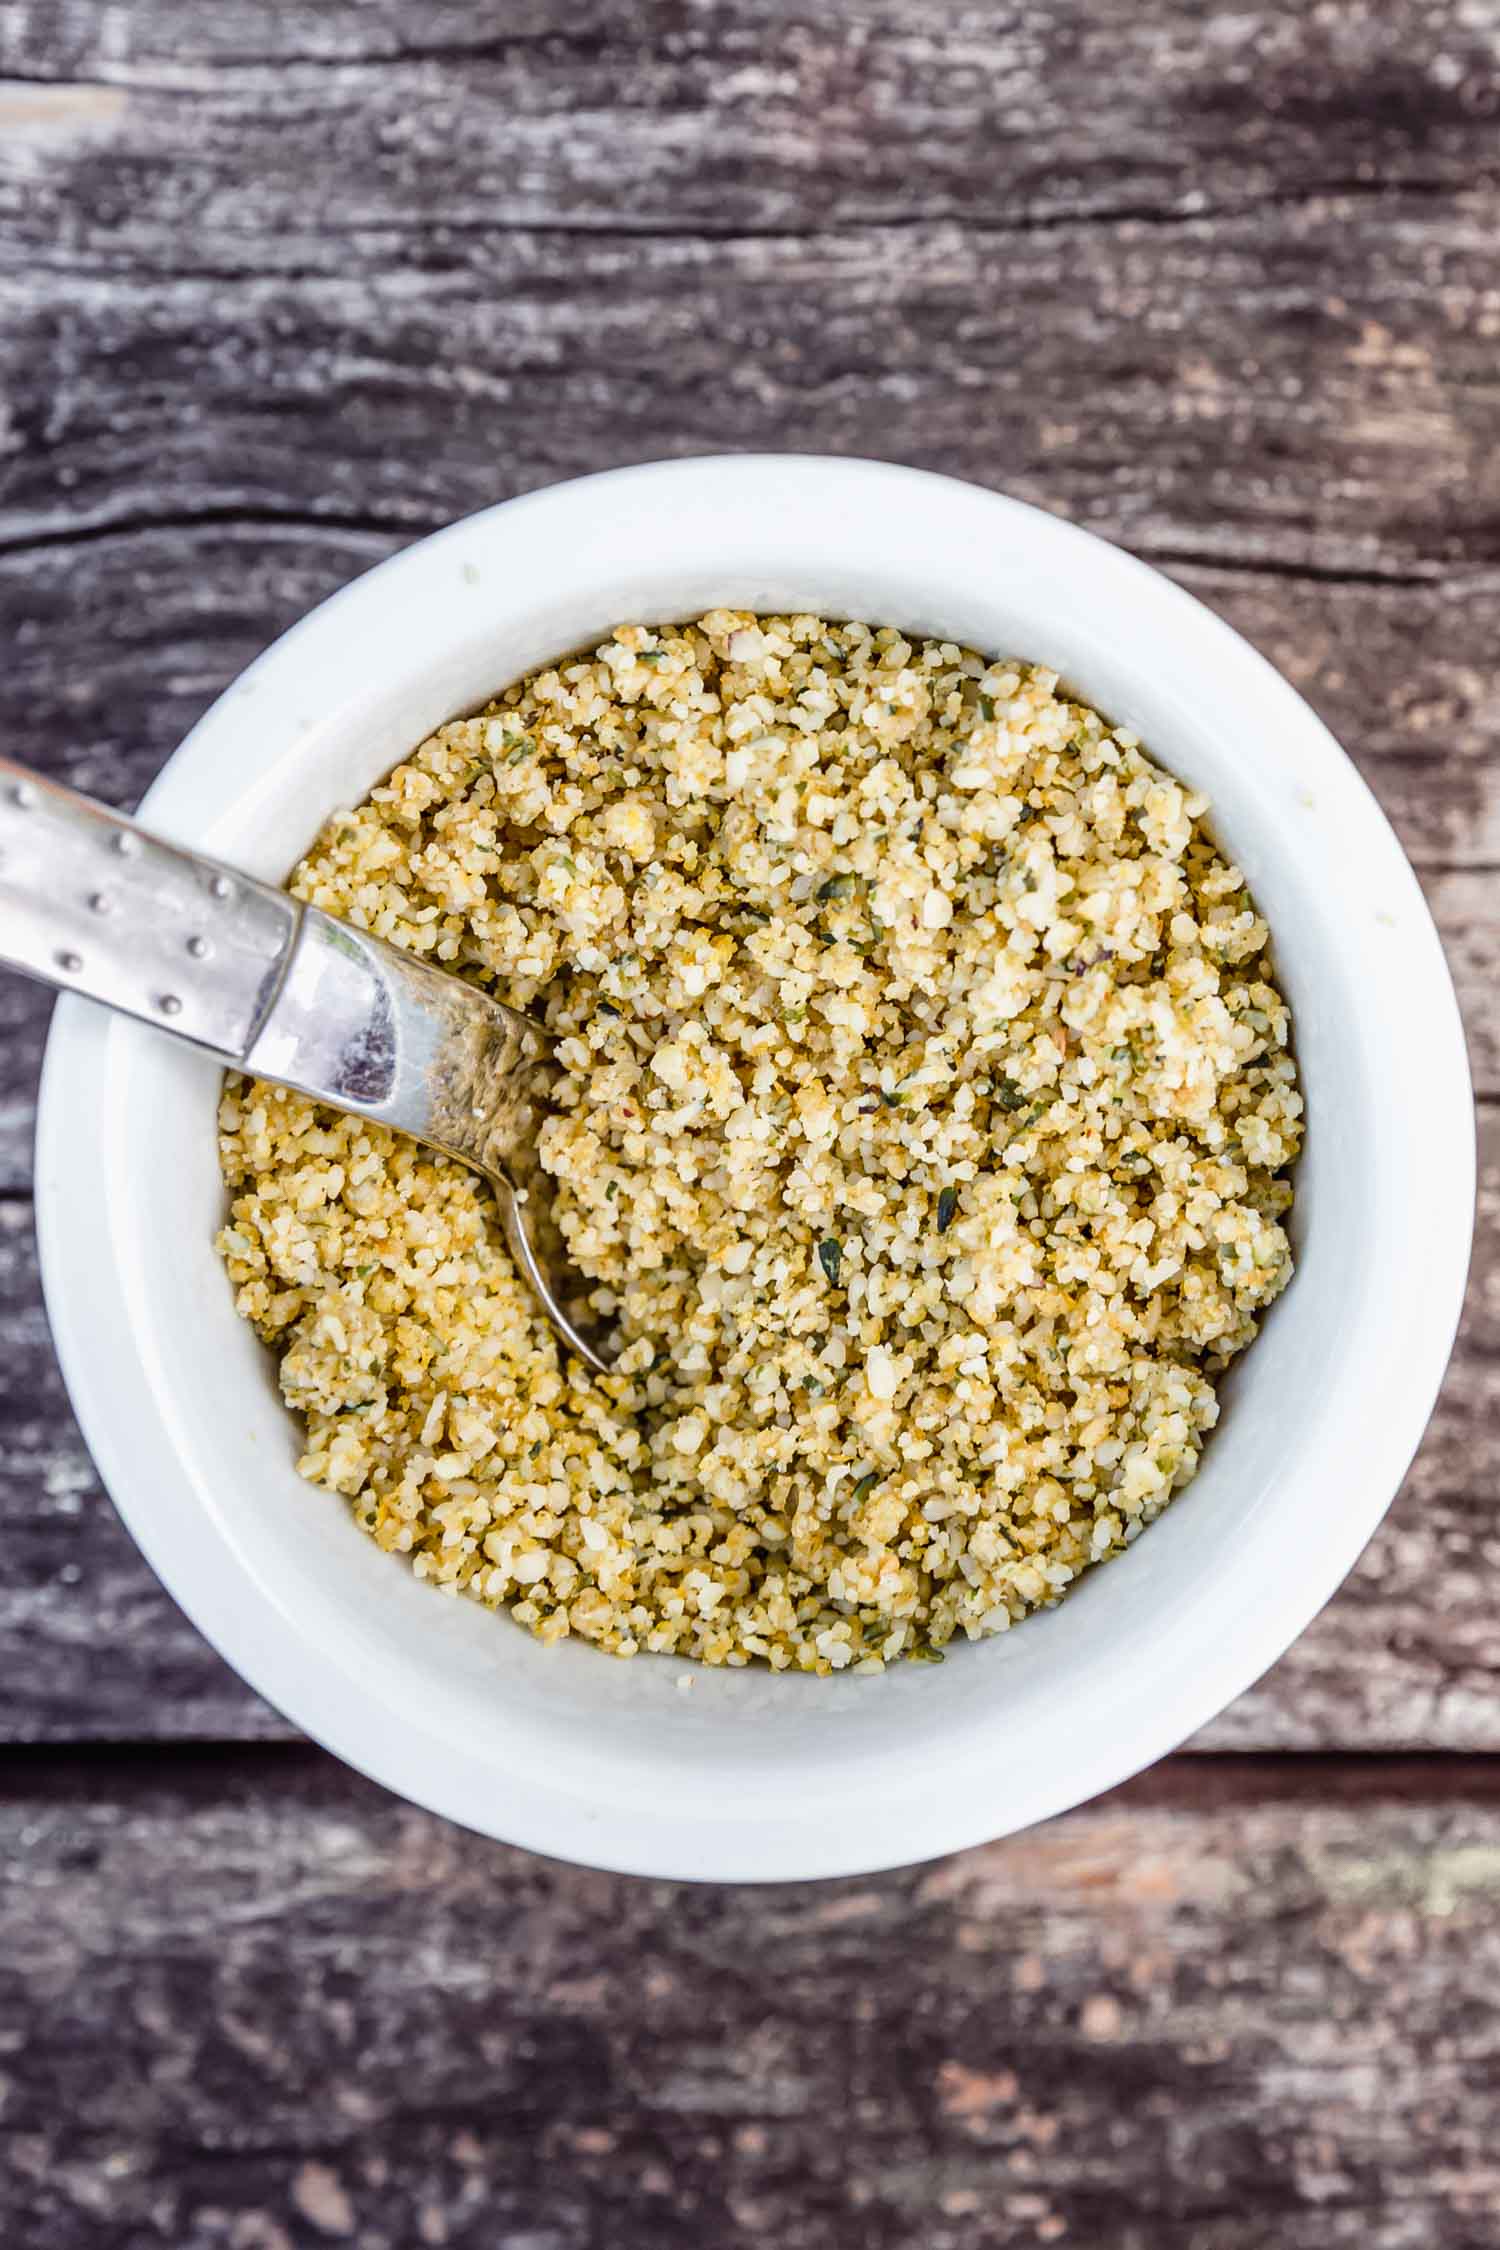 Hemp Parmesan from Epic Vegan: Wild and Over-the-Top Plant-Based Recipes by Dustin Harder. #cookbook #cookbookrecipe #veganrecipe #vegancheese #veganparmesan #hempseed #nutfreerecipe #vegancookbook